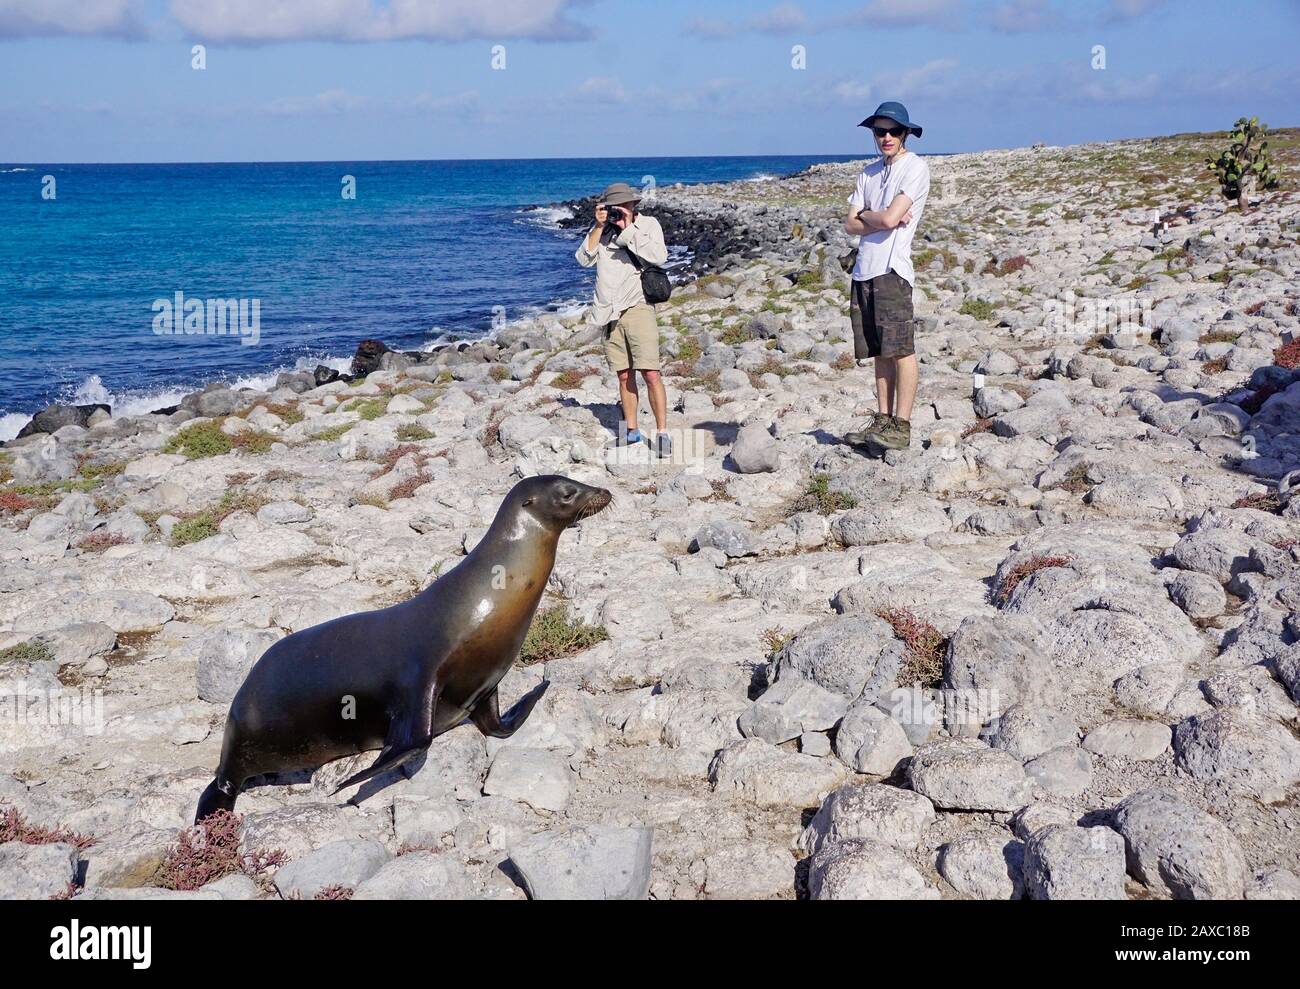 Tourist in Galapagos Islands photographing a sea lion on rocky shore. Stock Photo